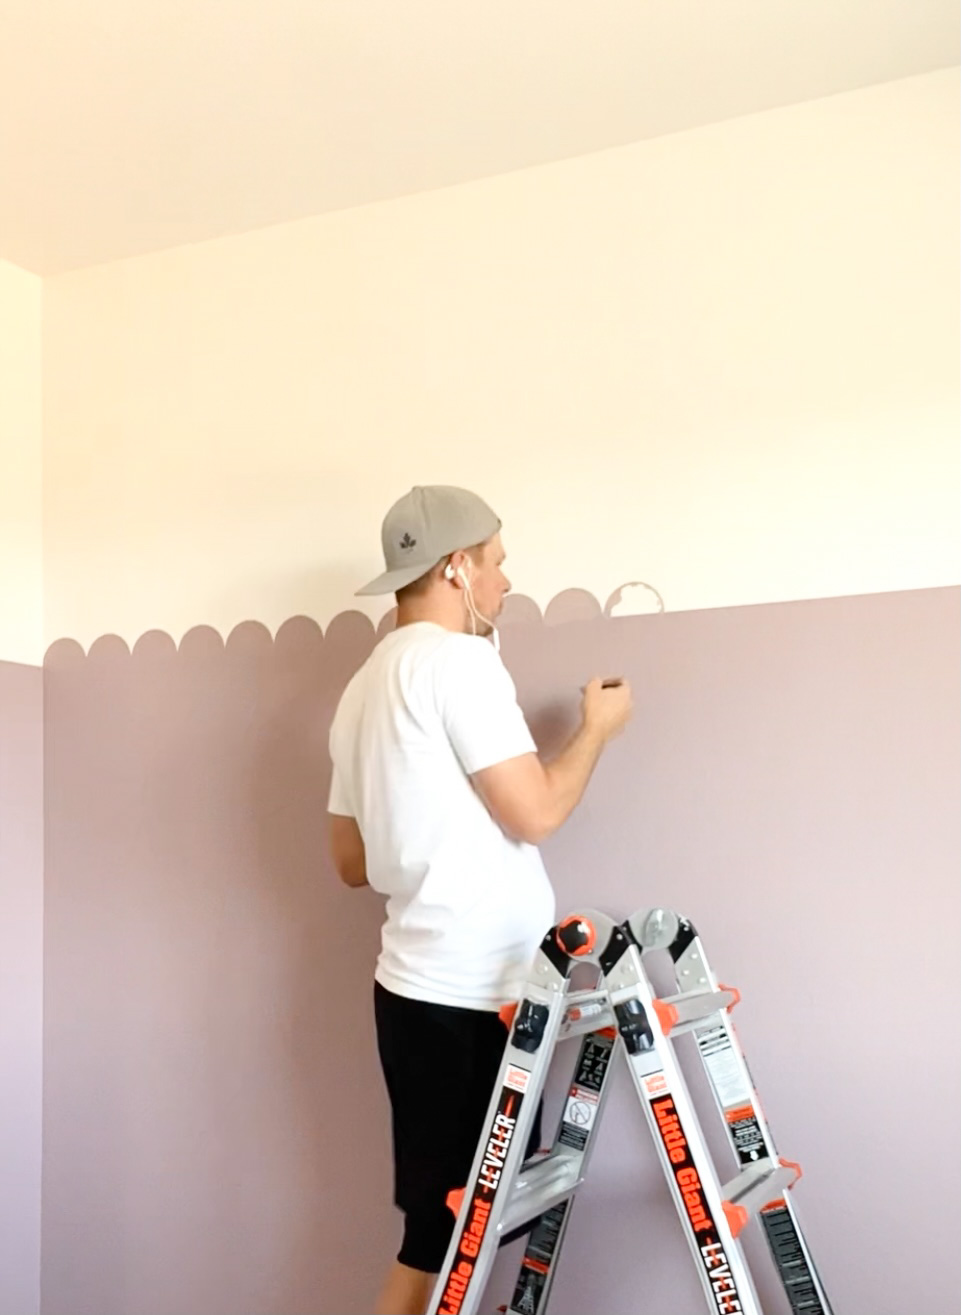 How to paint a scalloped wall: Mini bedroom refresh